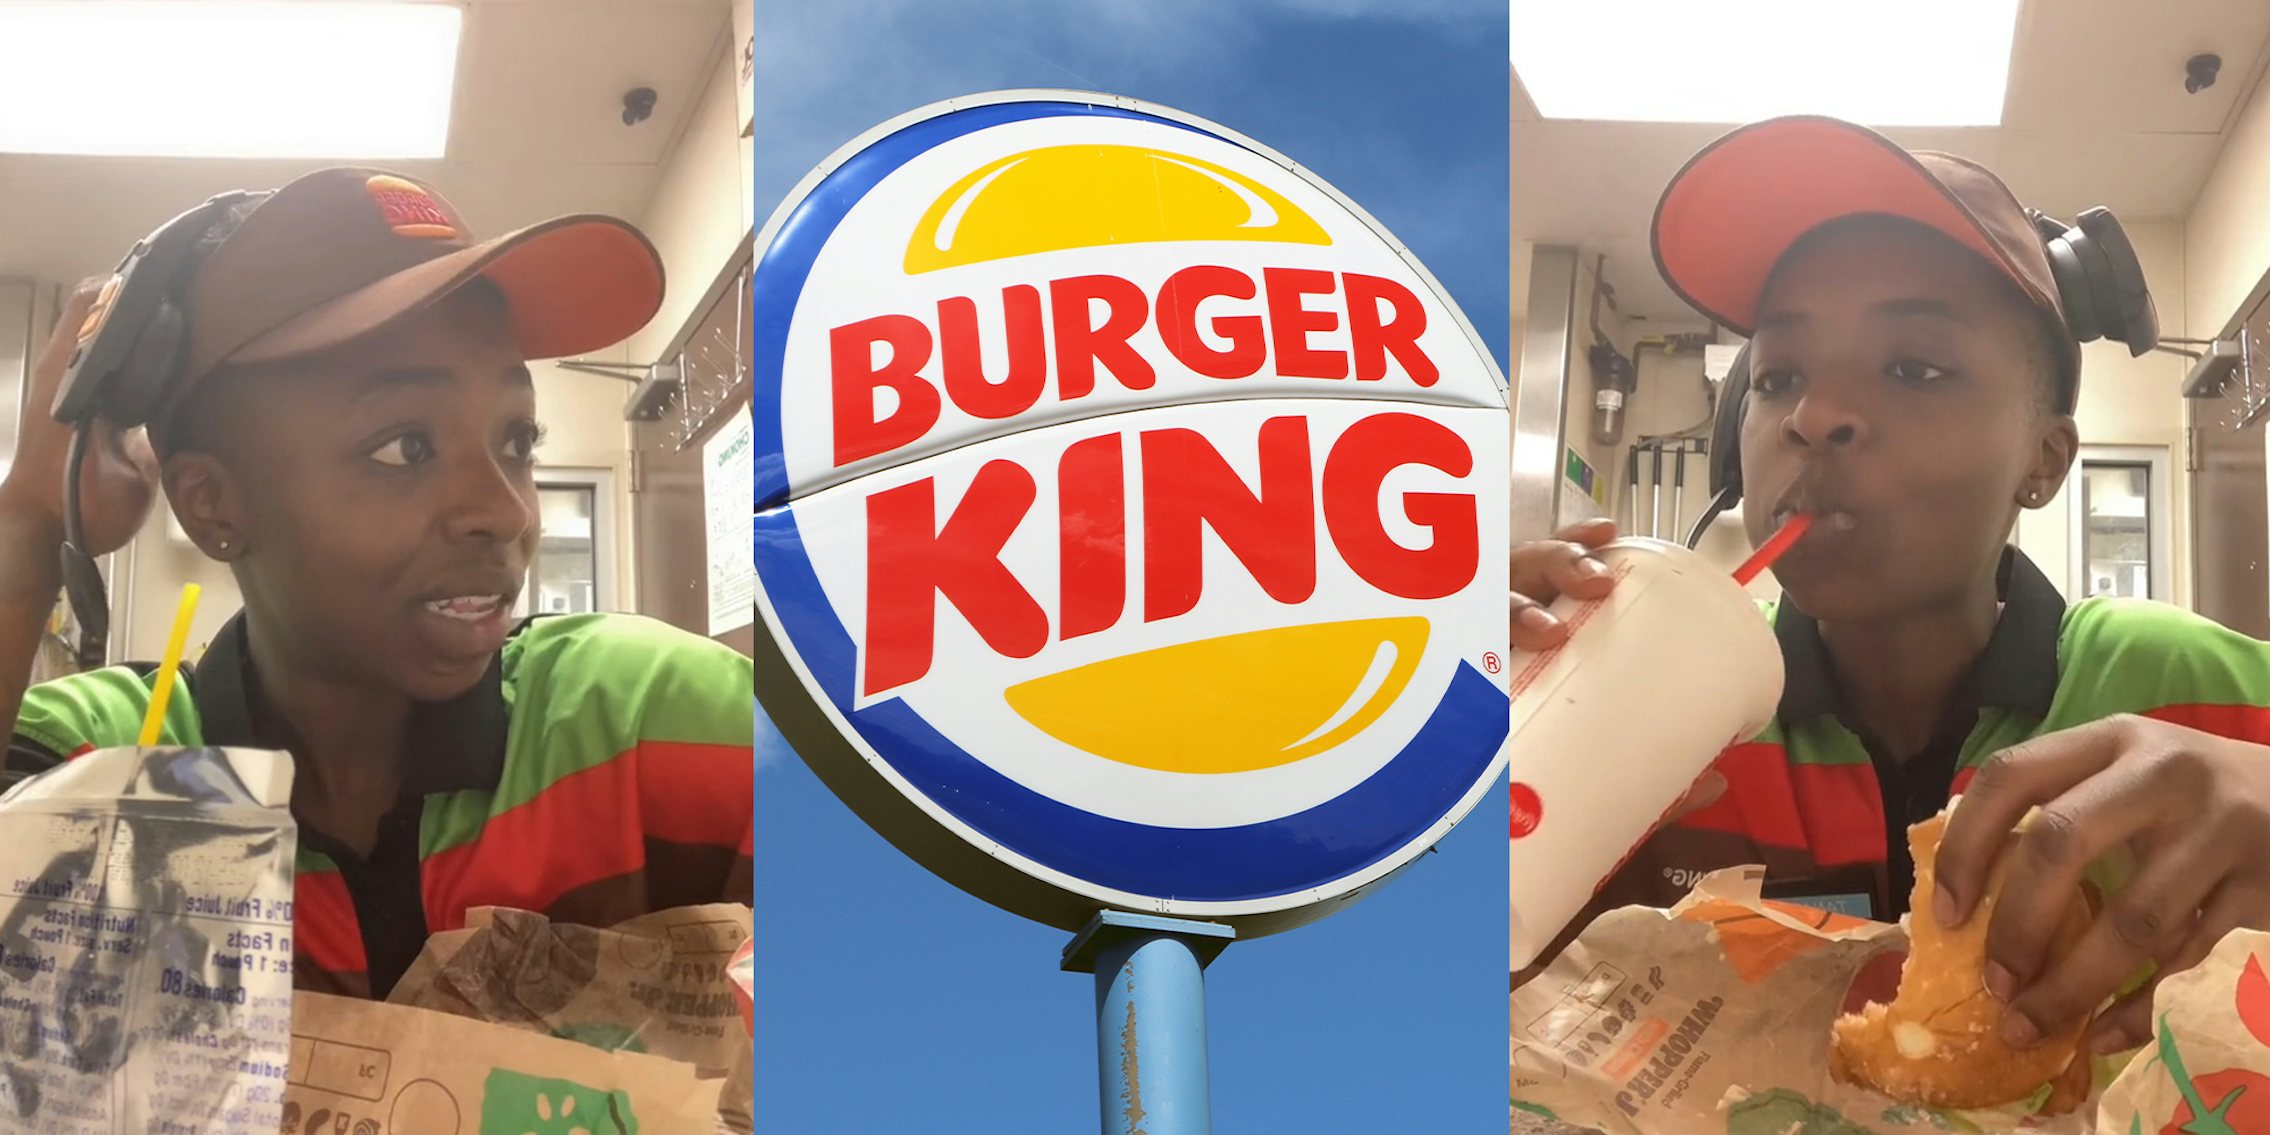 Burger King Worker Makes 13.25. She Says It Was Advertised at 16 an Hour